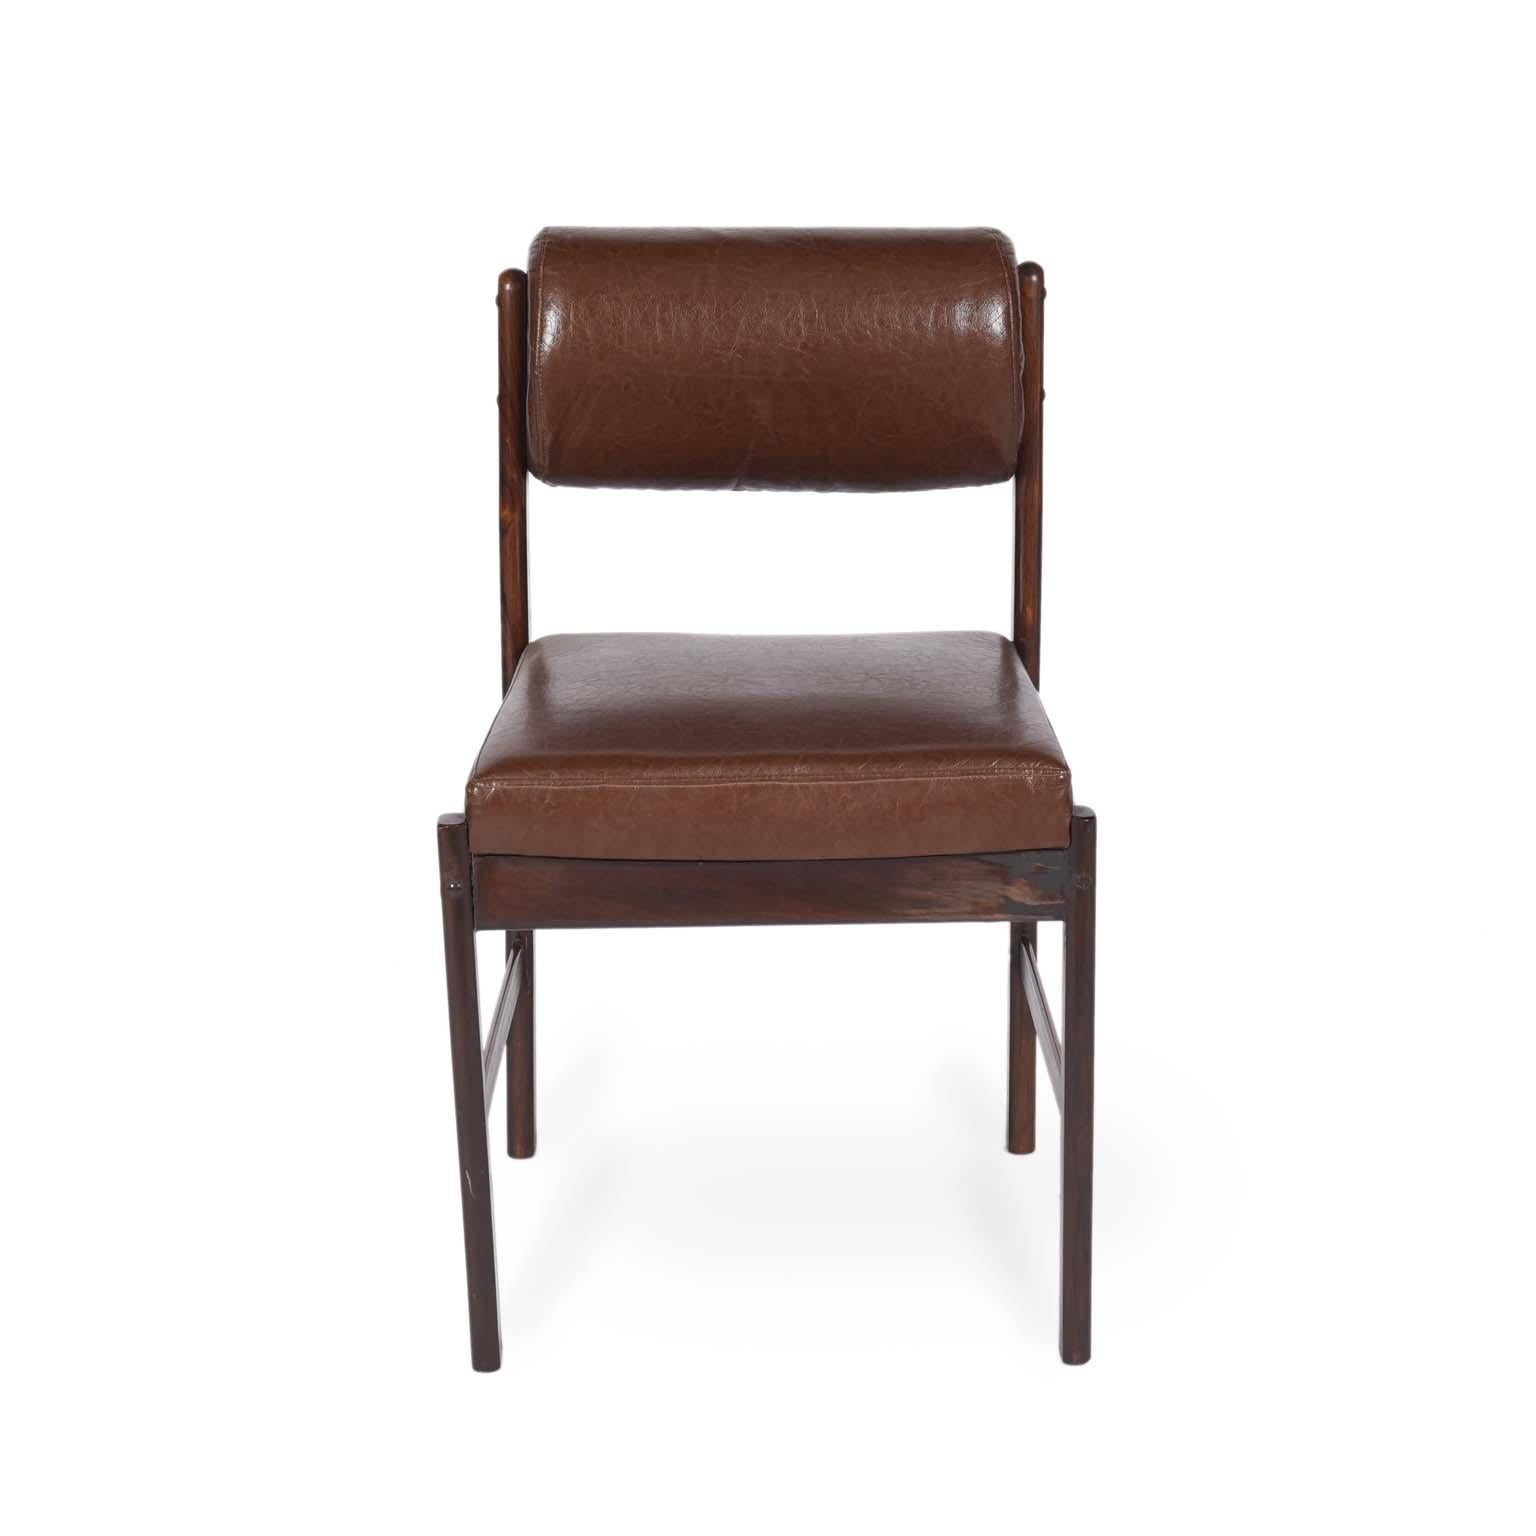 Midcentury Brazilian chair with wood structure and faux leather, 1960s.

Set of comfortable chairs in unidentified wood and faux leather seat.